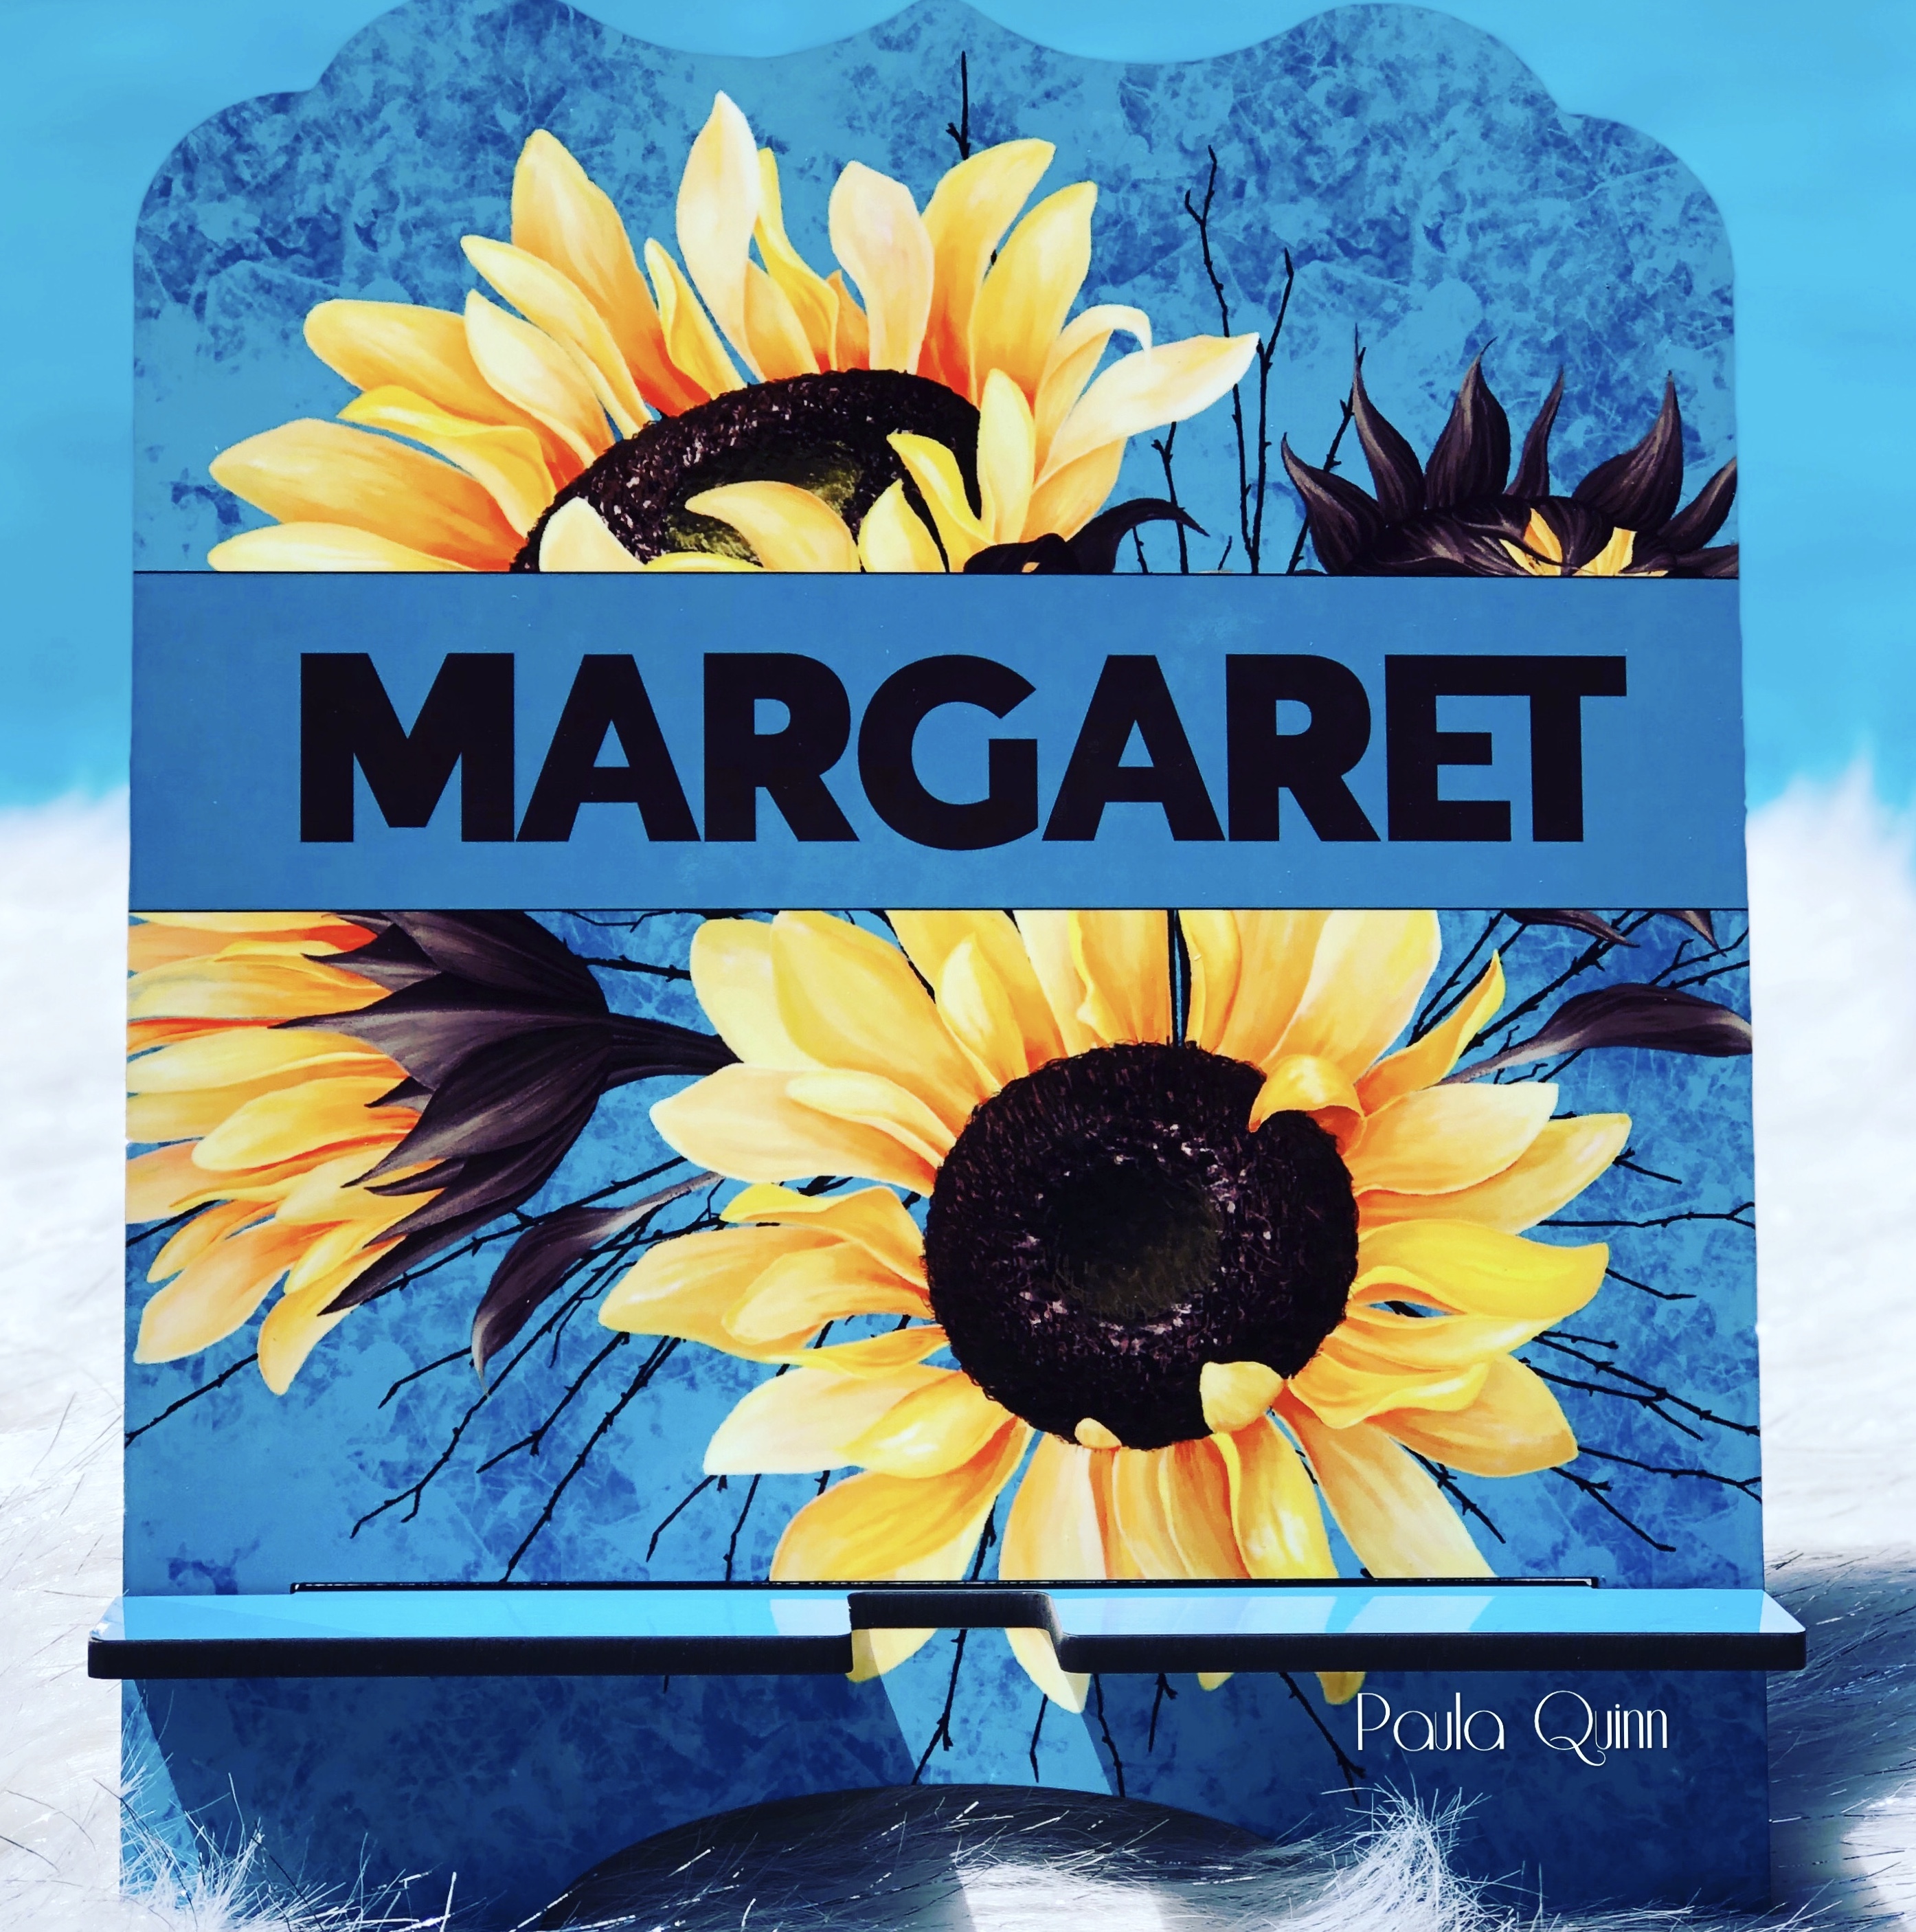 Sunflower image stand made with sublimation printing